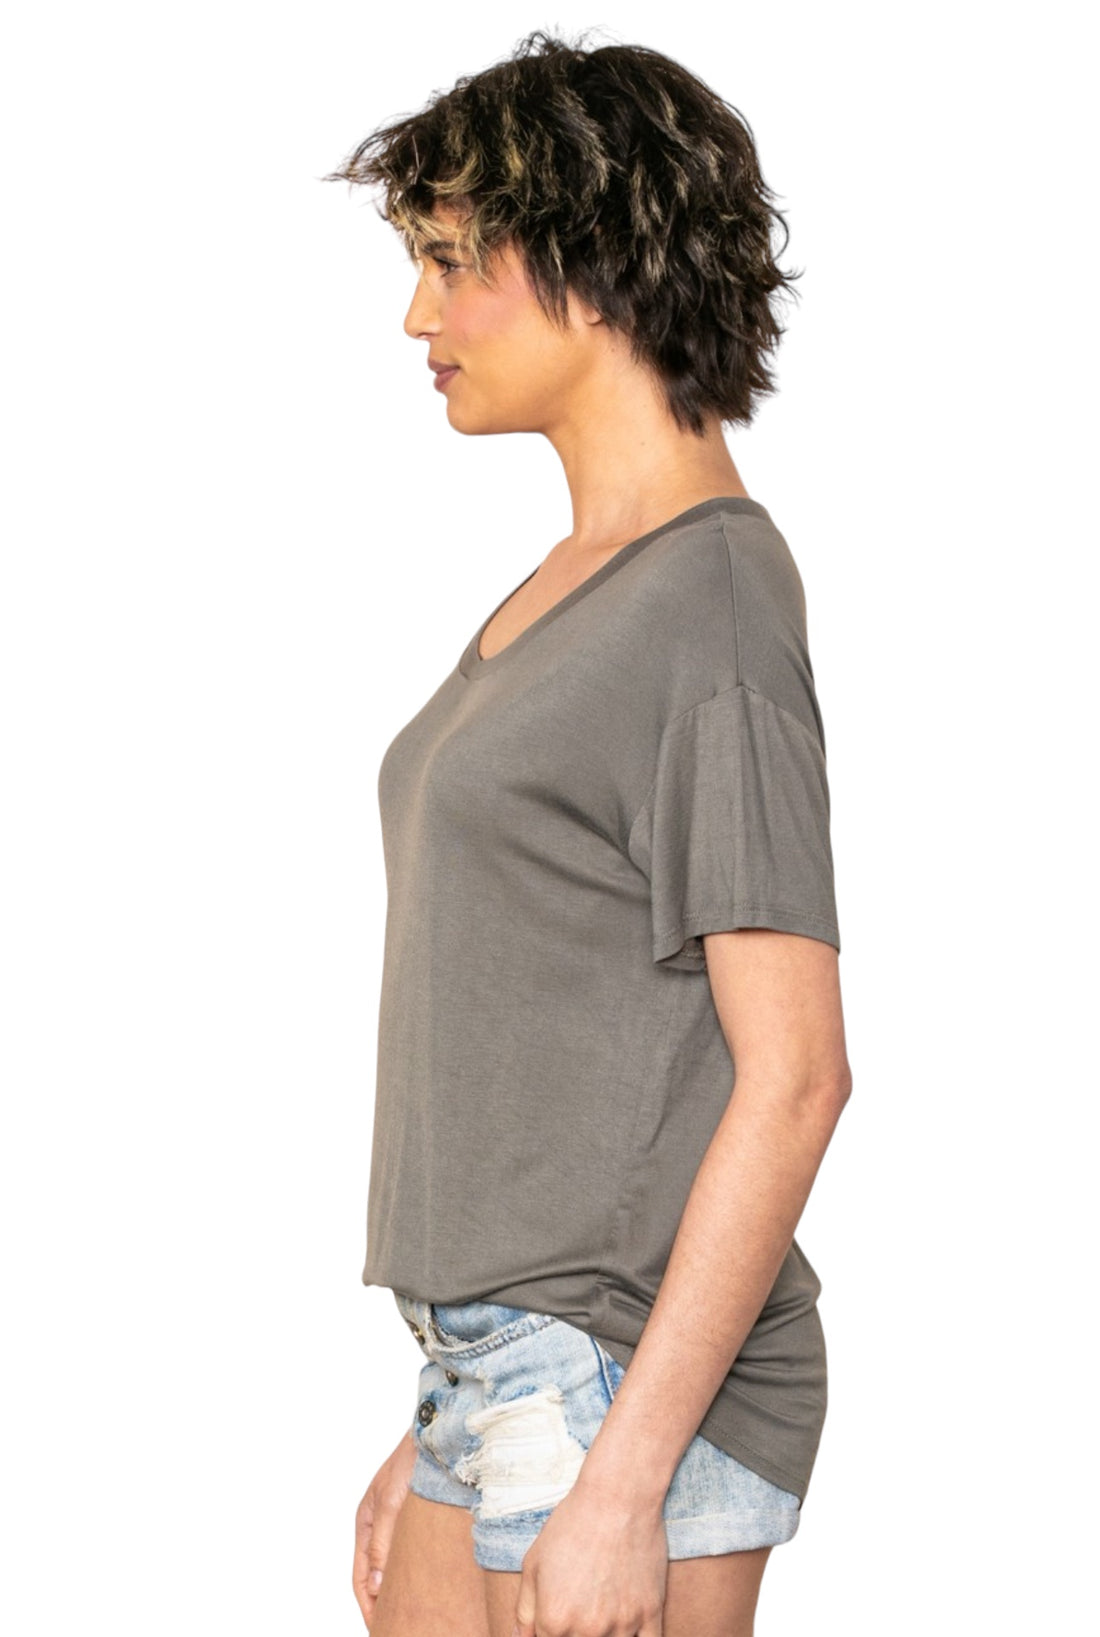 Not So Basic Taupe Scoop Neck Tee